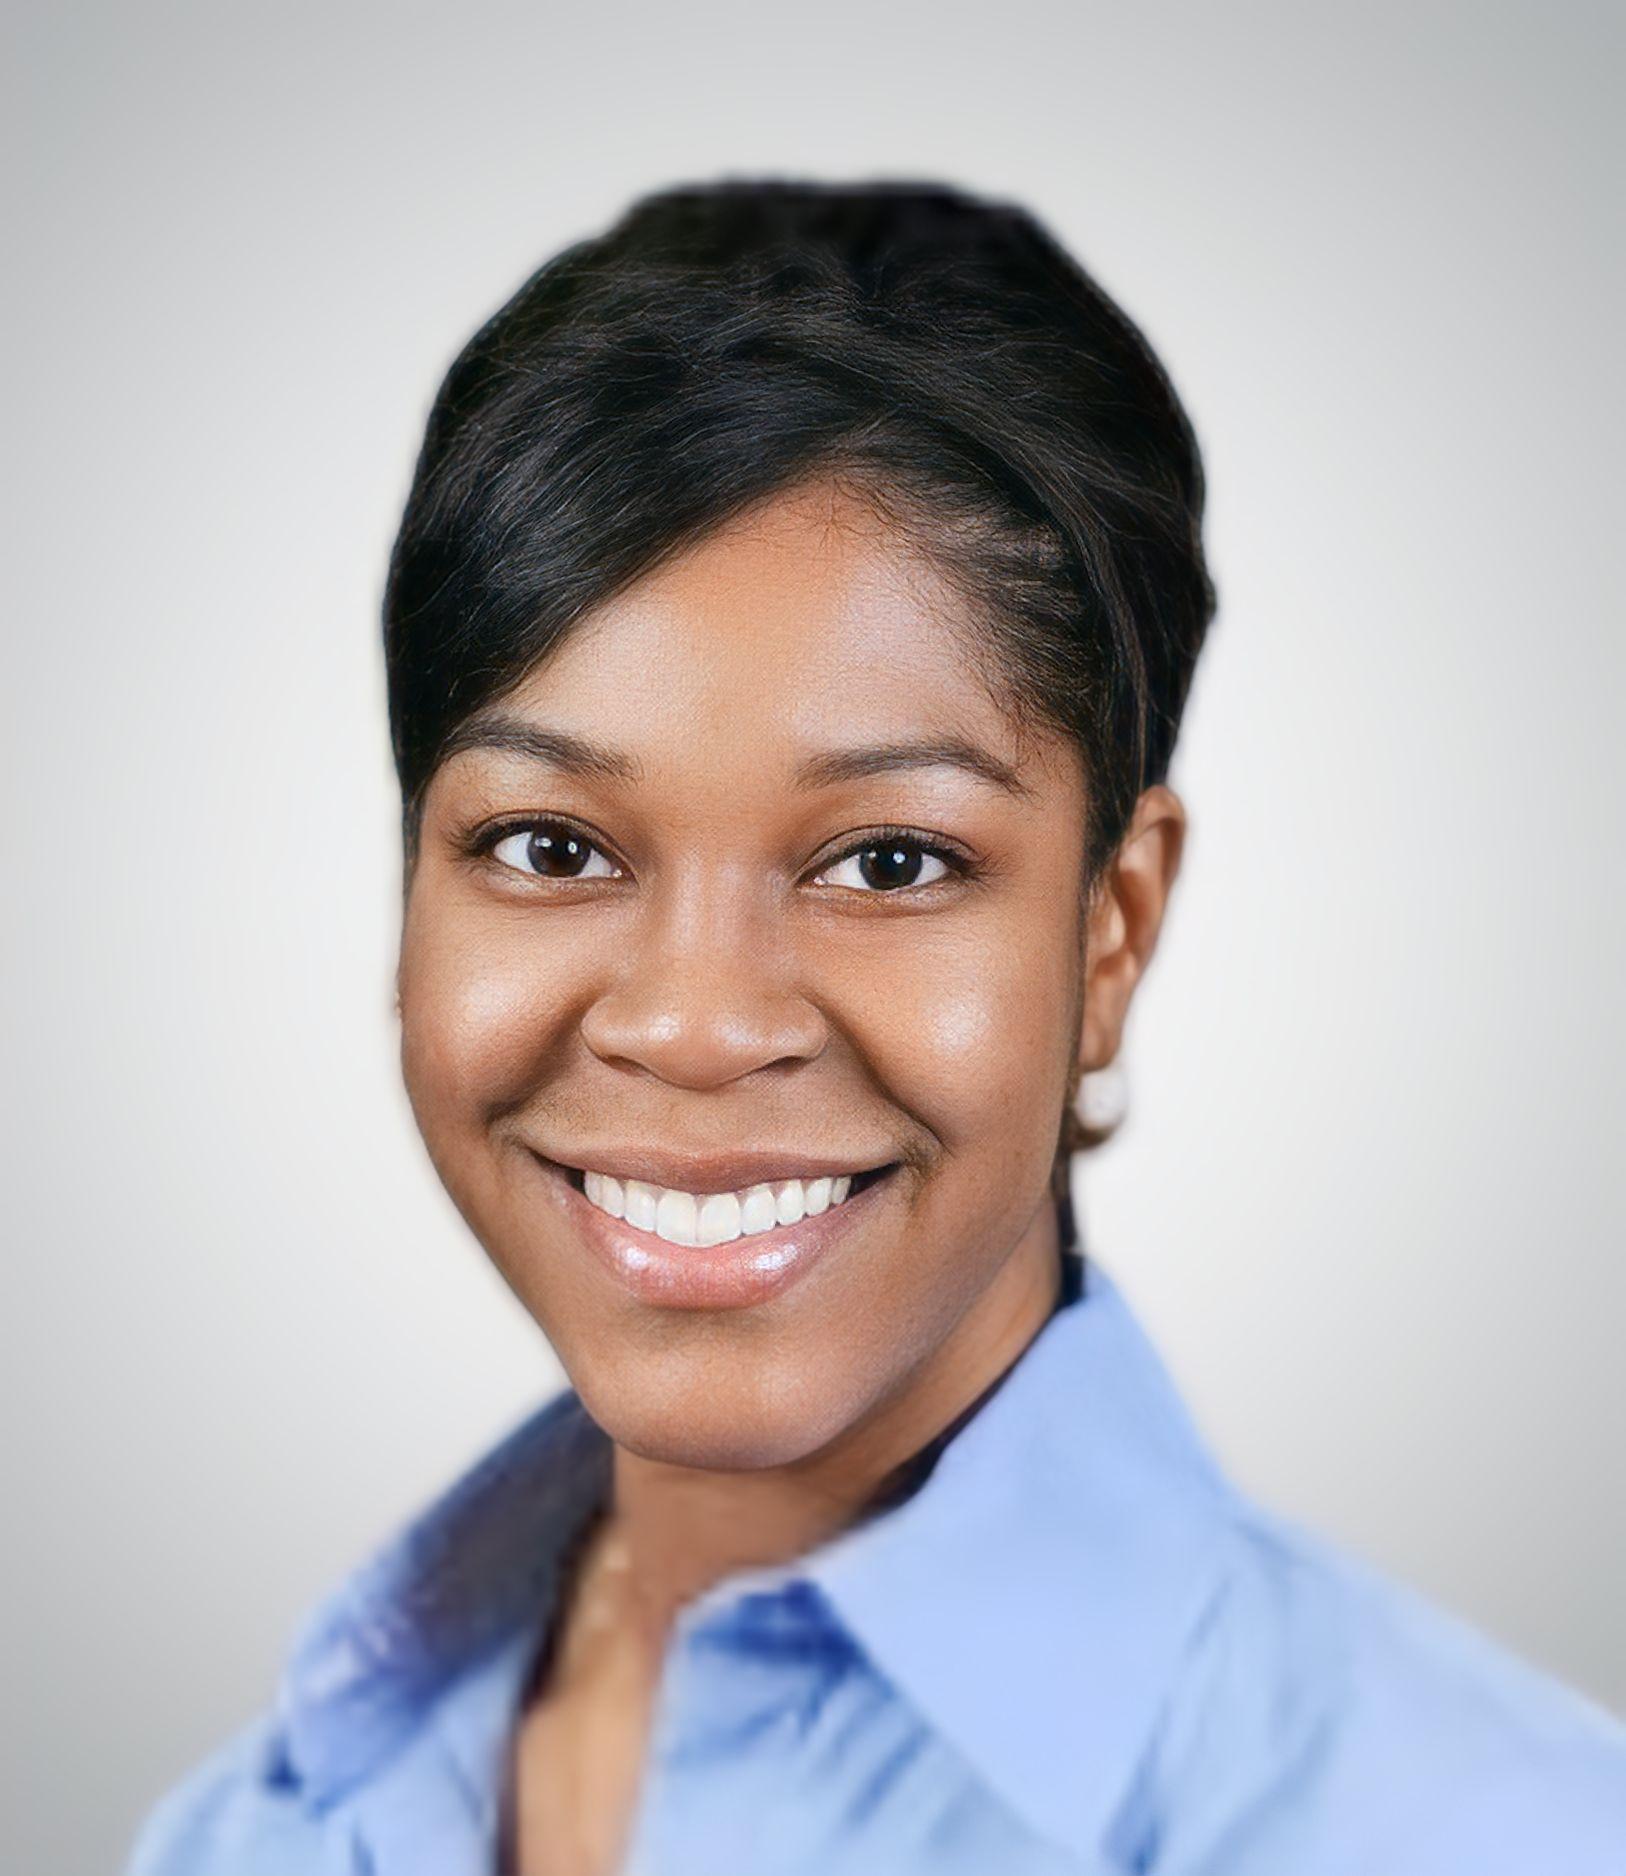 LaVictoria Green, DMD Orthodontist in Lake Mary, FL